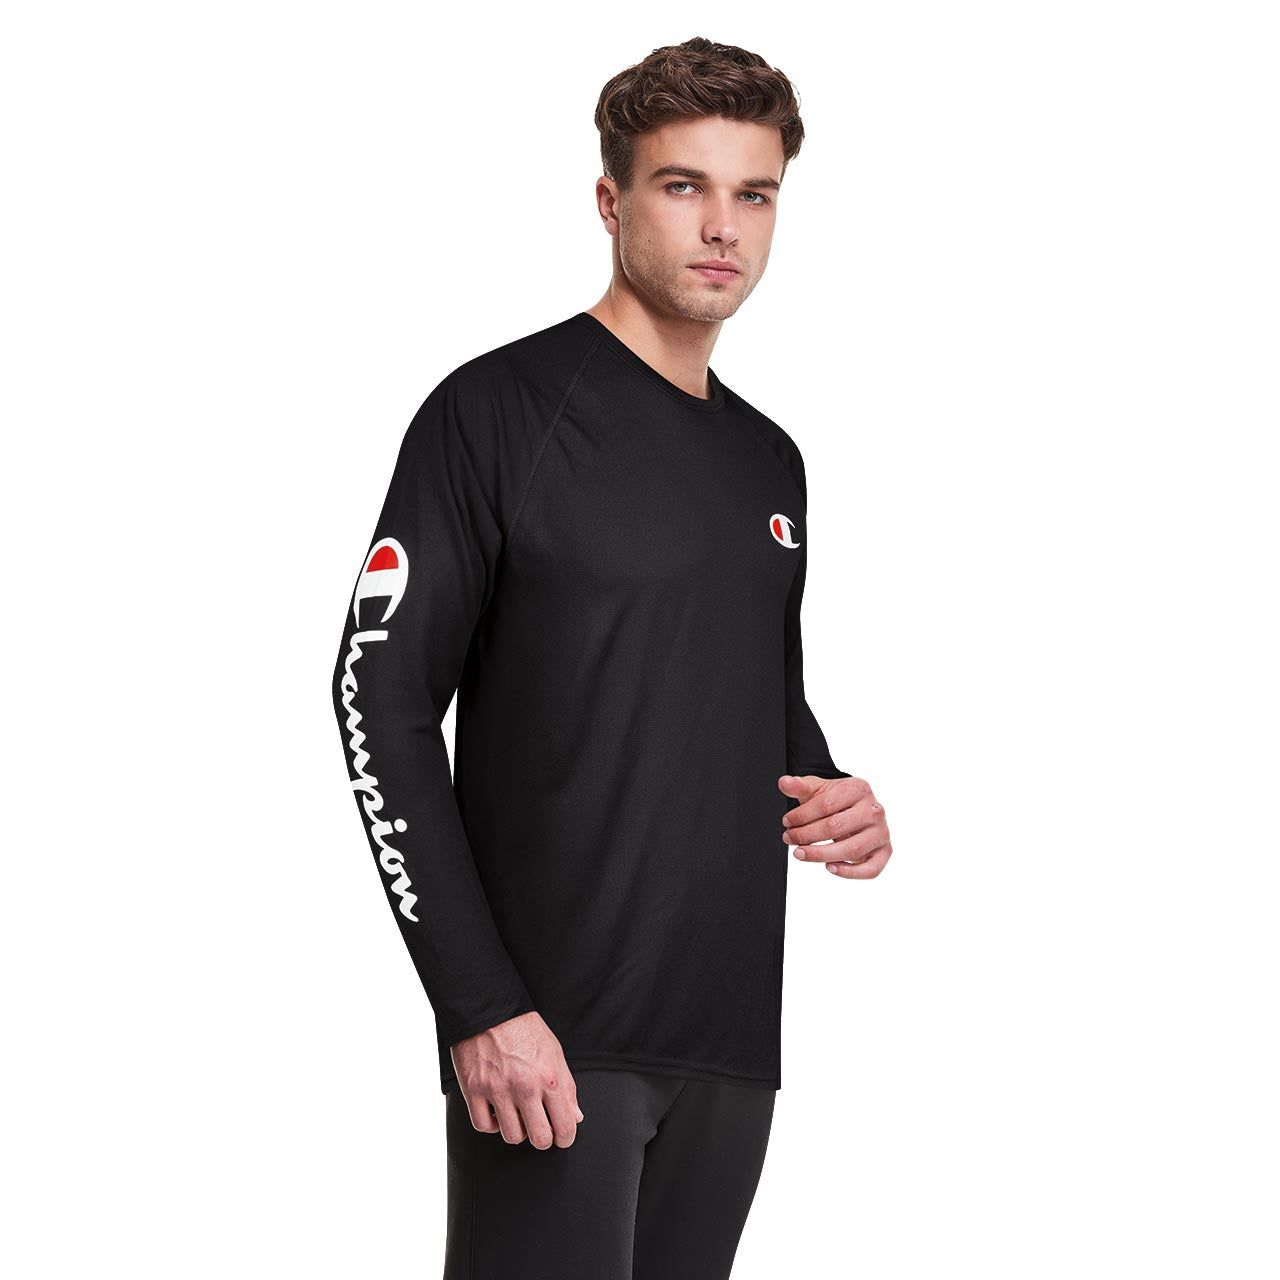 Men’s Mid-Weight Wicking Finish Base Layer Top